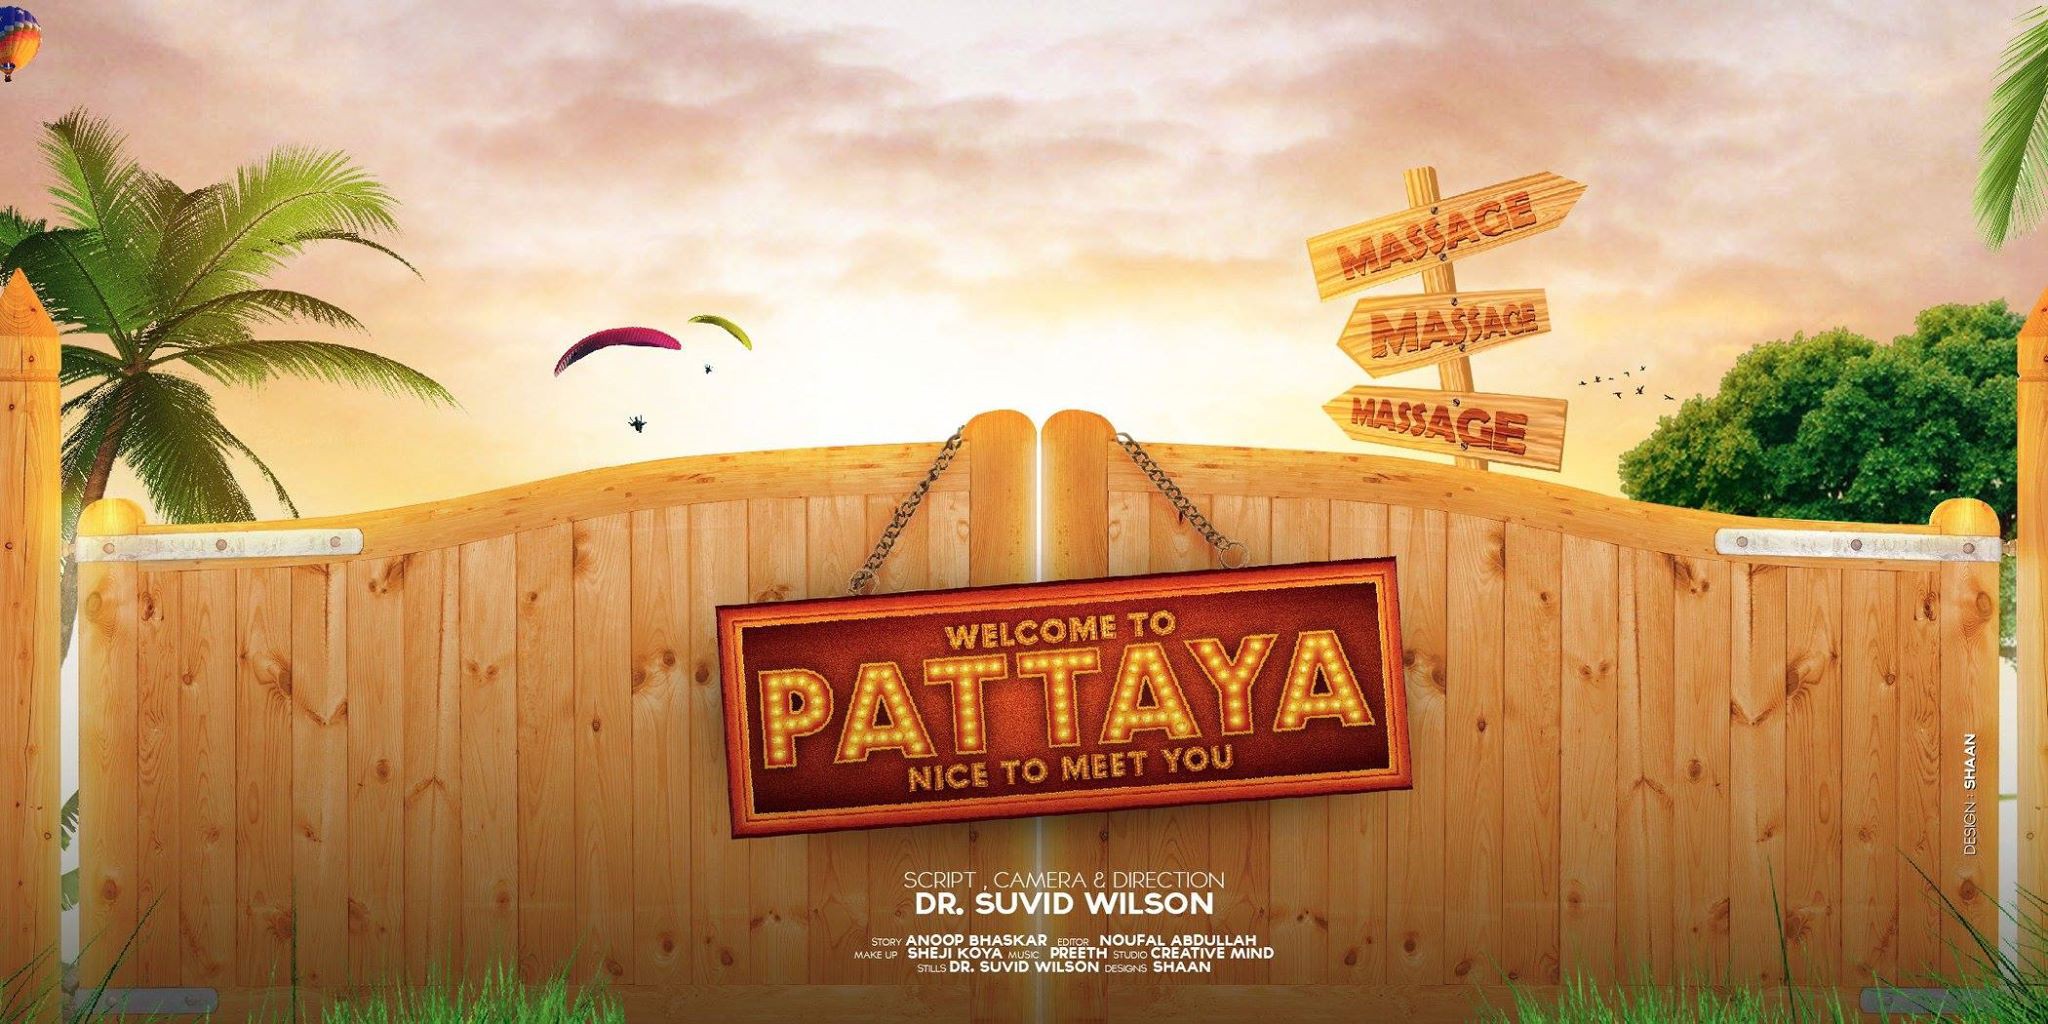 Mega Sized Movie Poster Image for Welcome to Pattaya Nice to Meet You